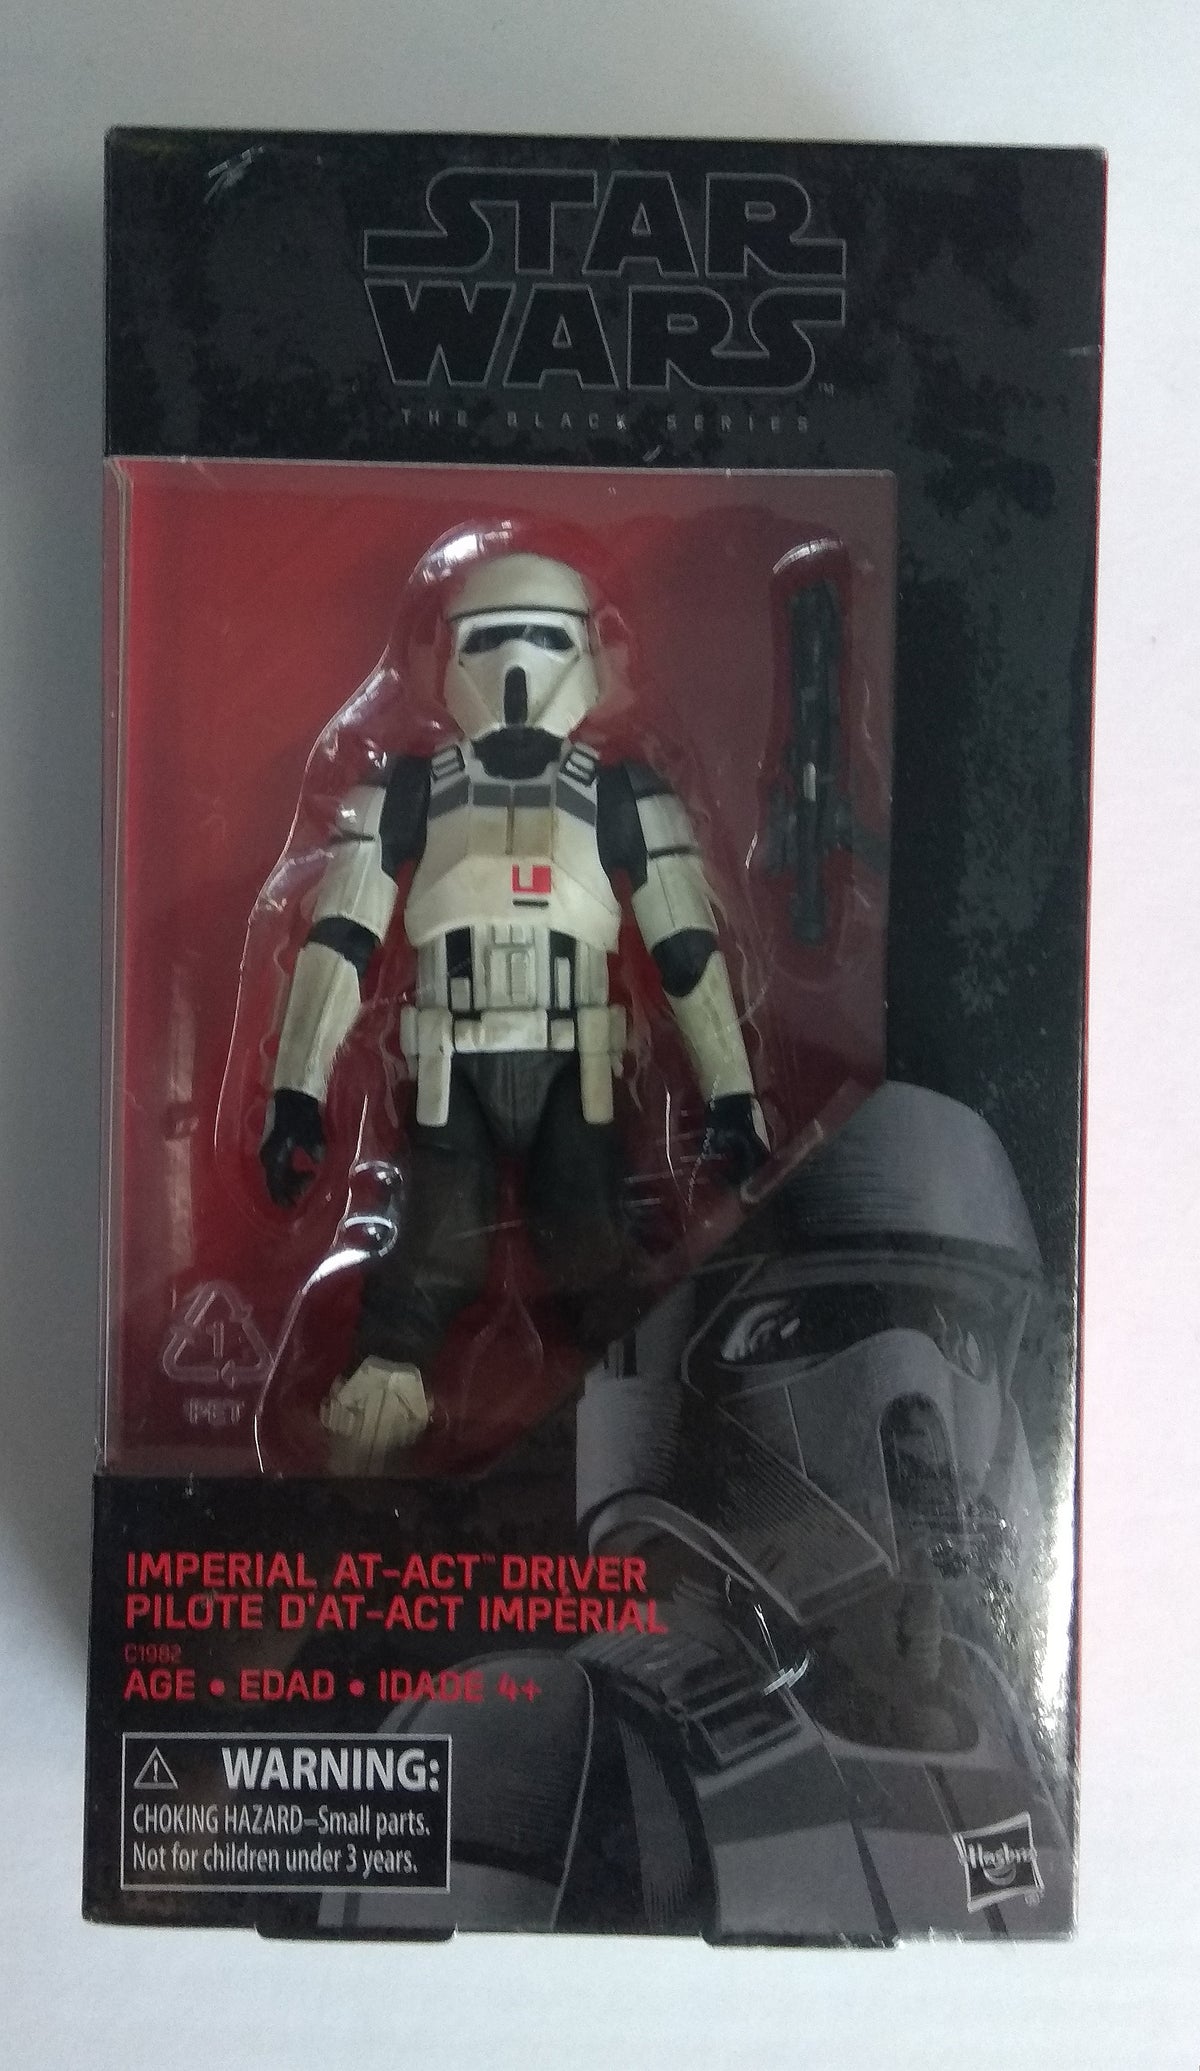 Imperial At-Act Driver